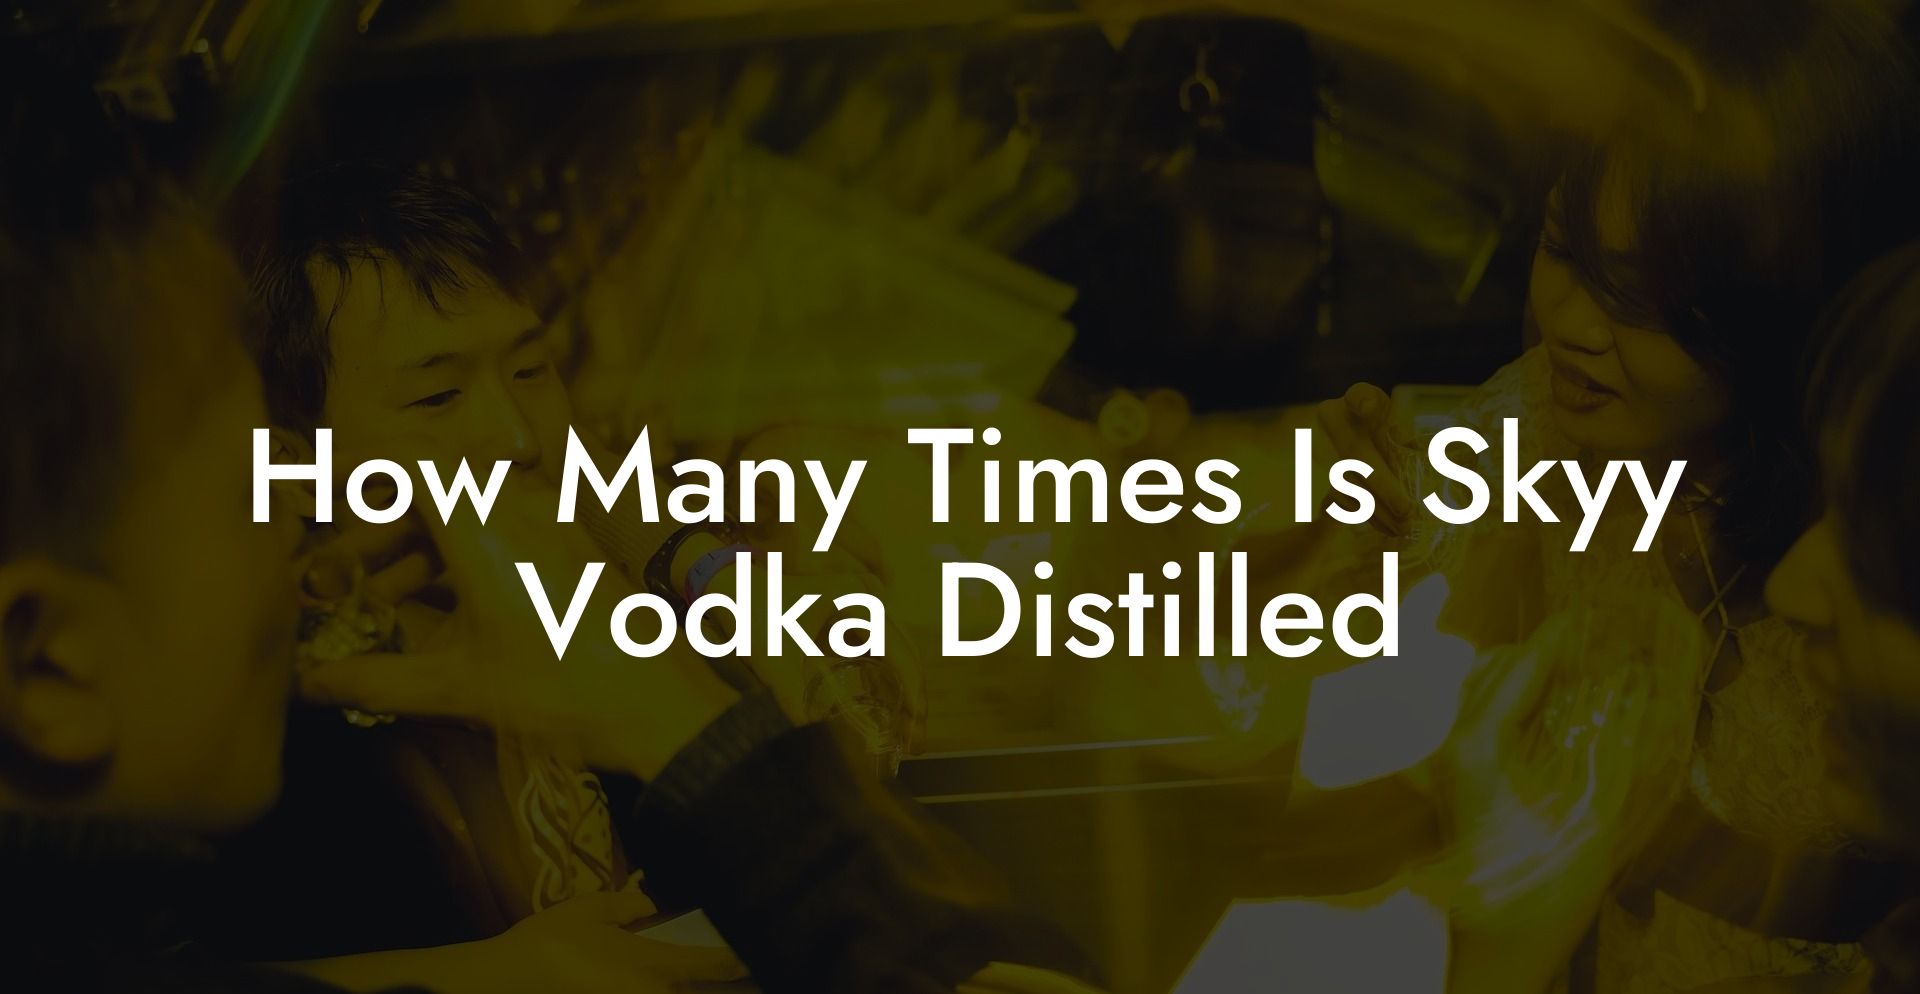 How Many Times Is Skyy Vodka Distilled